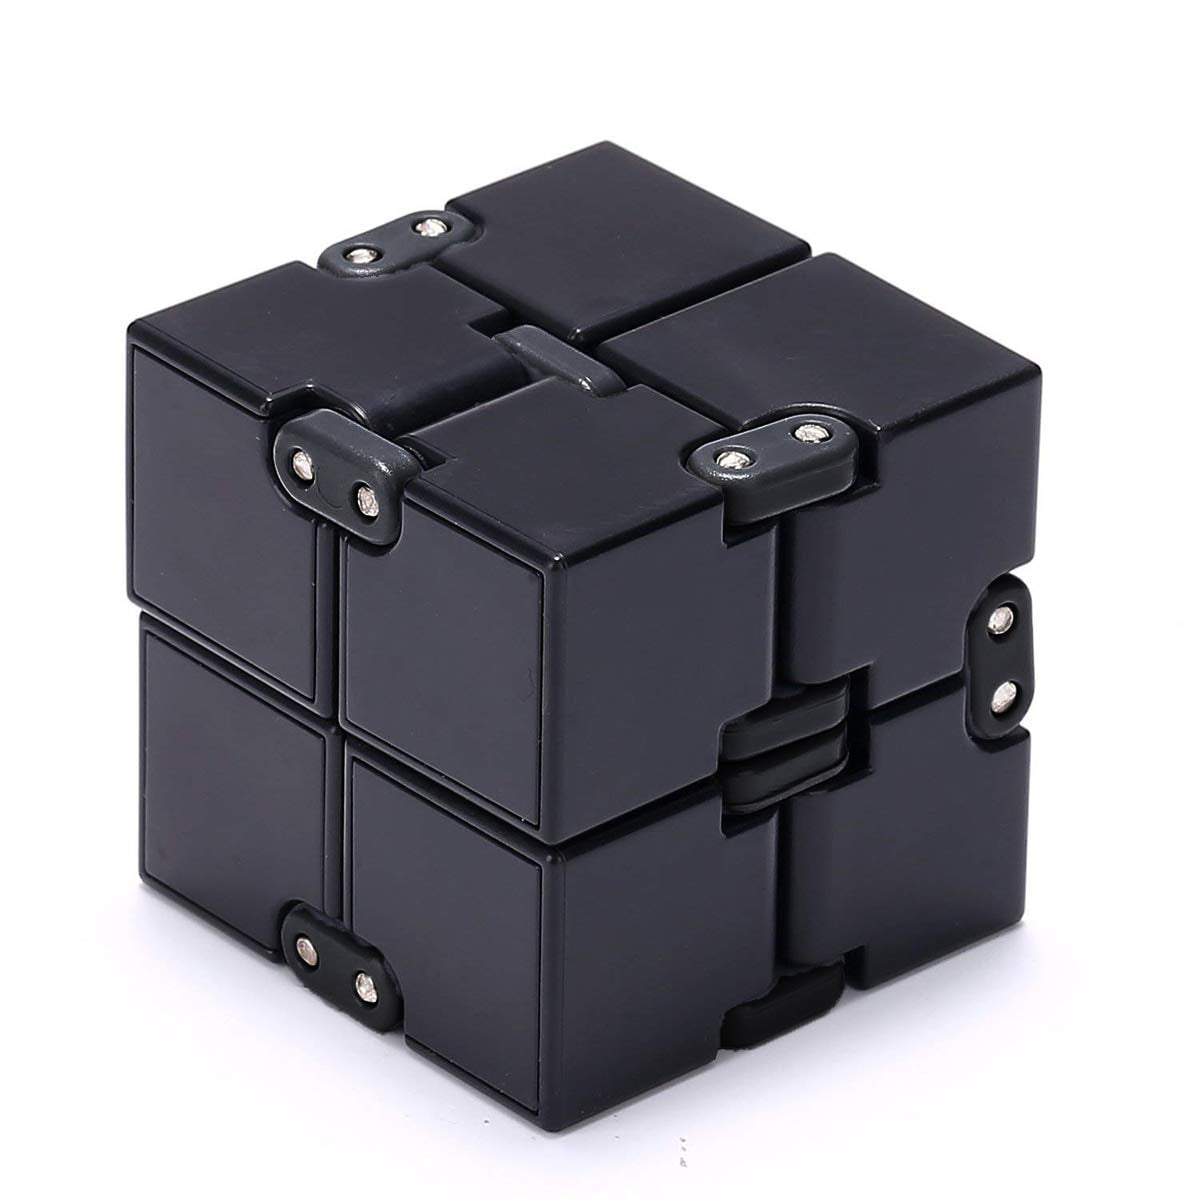 Details about   Sensory Infinity Cube Stress Fidget Toys for Autism Anxiety Relief Kids Adult U 